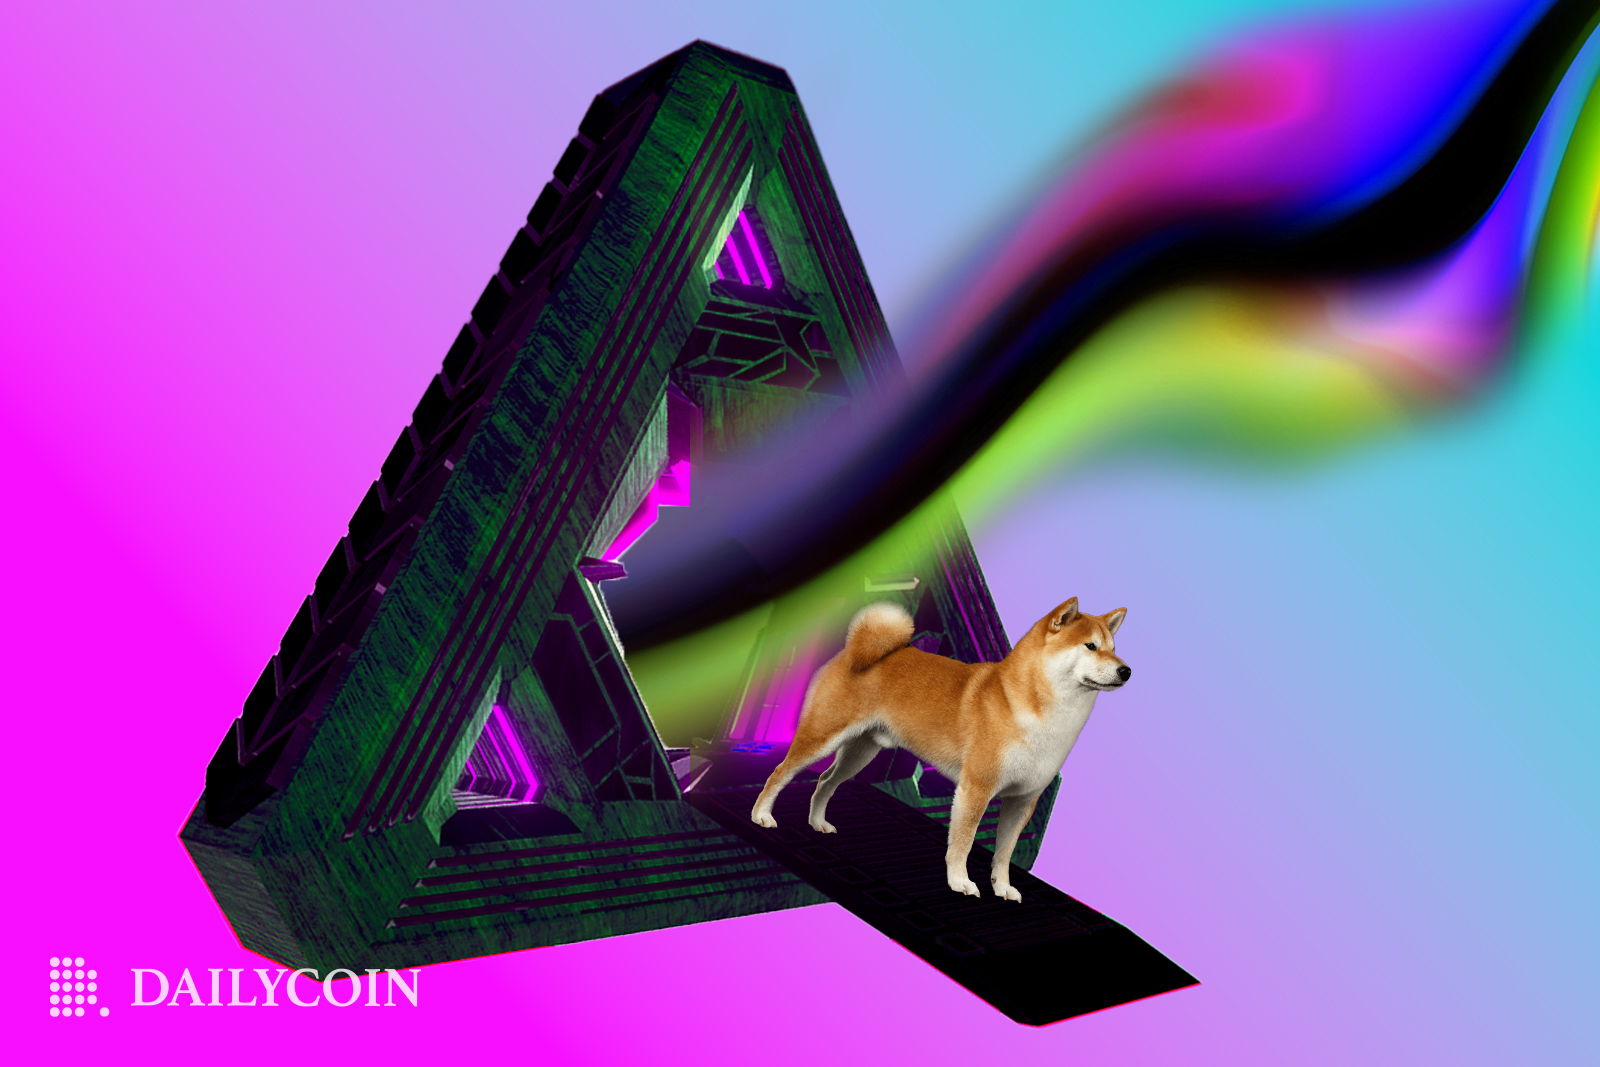 A shiba Inu dog stands on a black carpet next to a triangular portal. The portal is emanating rainbow-colored, blurred smoke from the center.